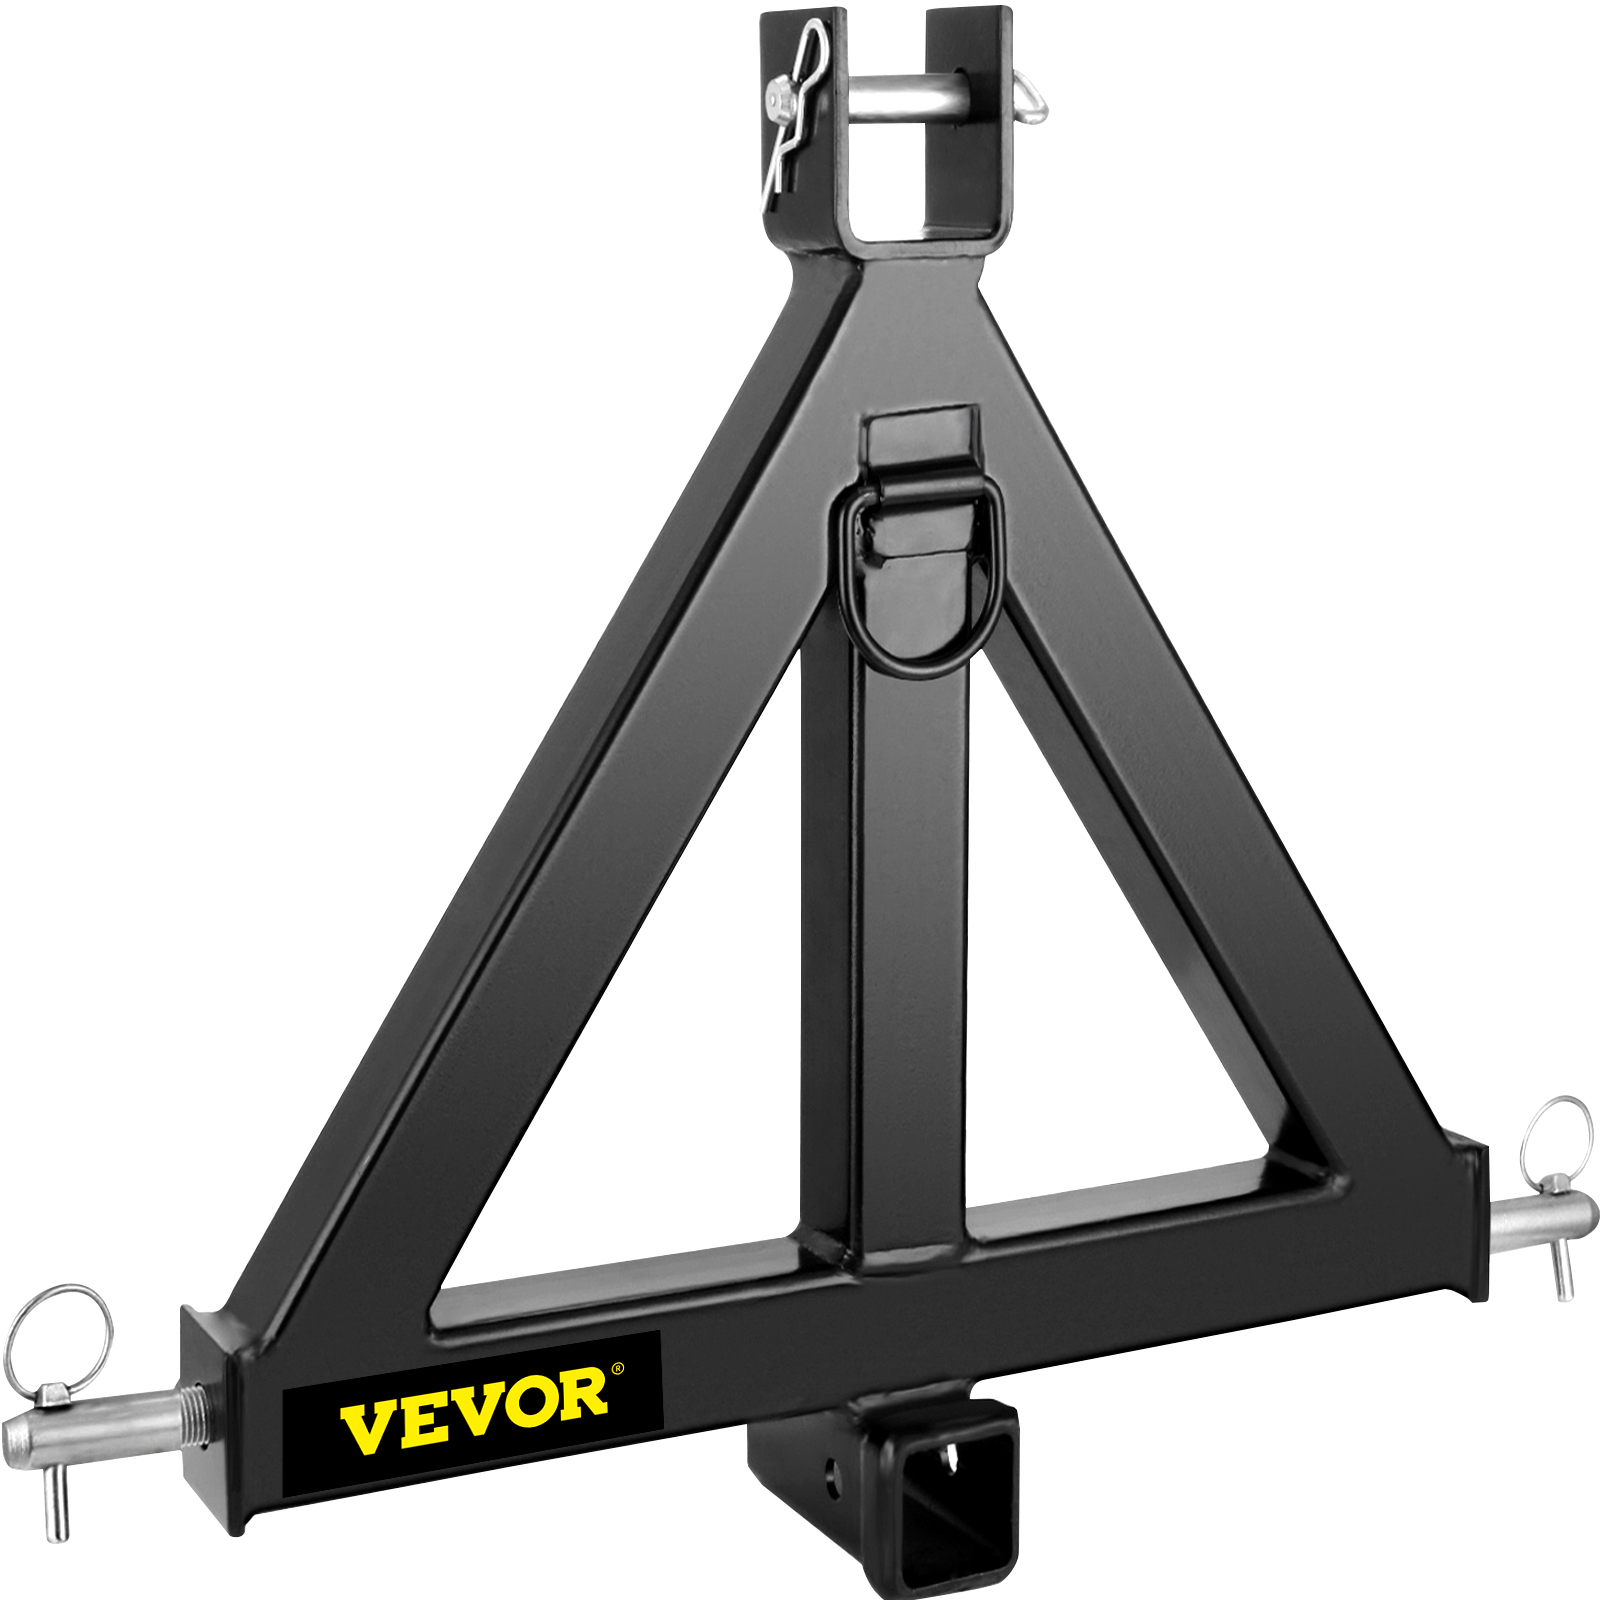 3-point Quick Hitch Category 1 Farming Tractor Implement Attachments Hook от Vevor Many GEOs